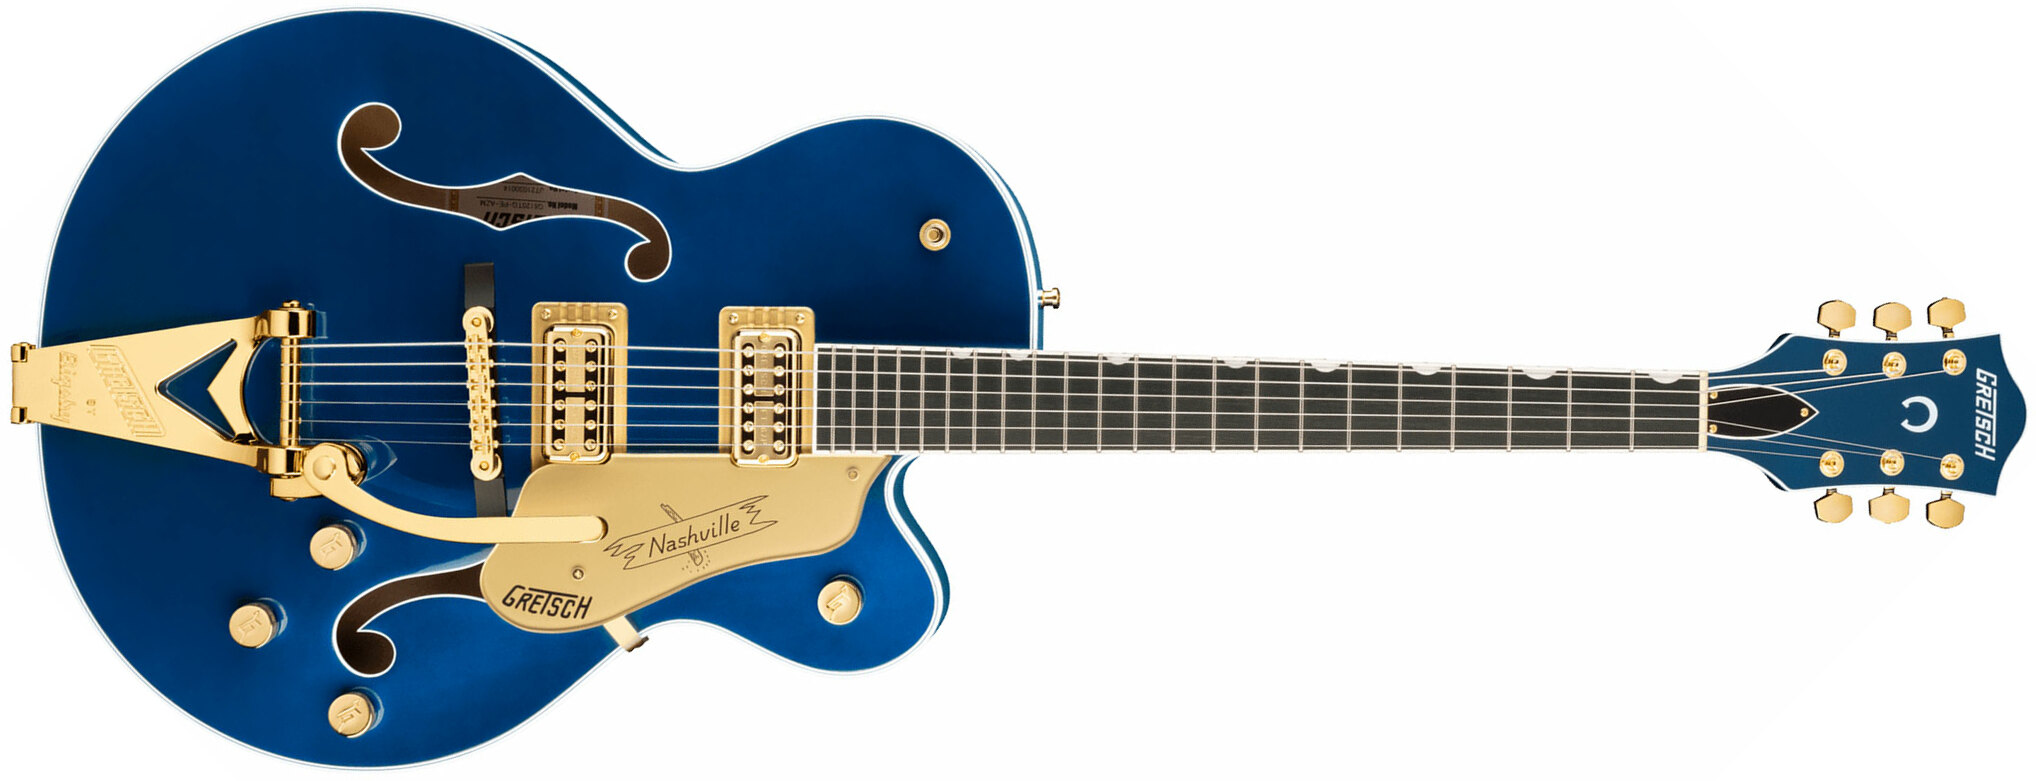 Gretsch G6120tg Players Edition Nashville Pro Jap Bigsby Eb - Azure Metallic - Semi-hollow electric guitar - Main picture